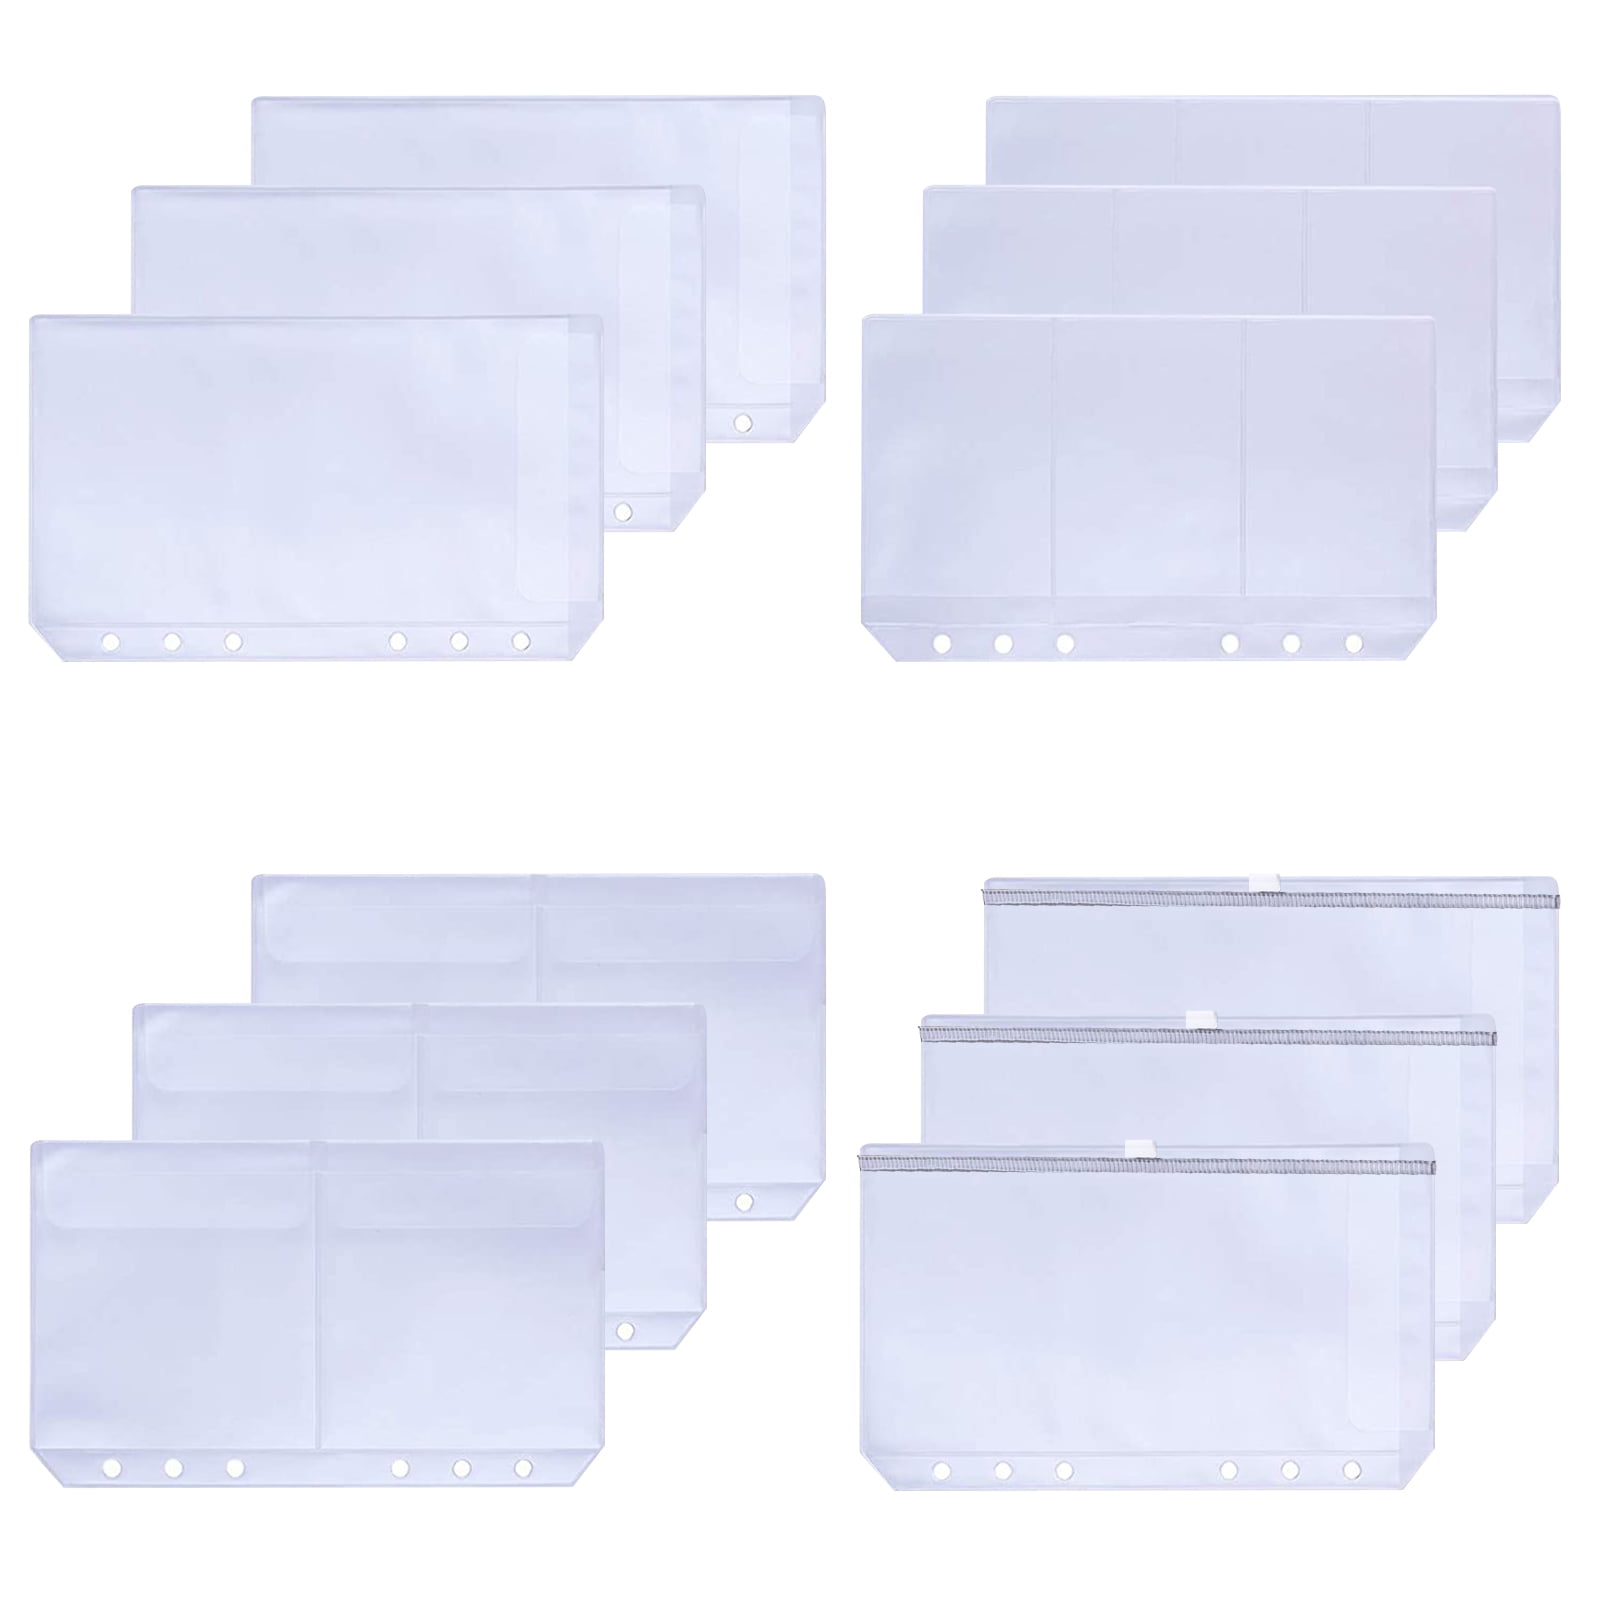 Coupon Sleeves Holders Inserts Pages for binders cards 3 POCKETS Money Bills 5 